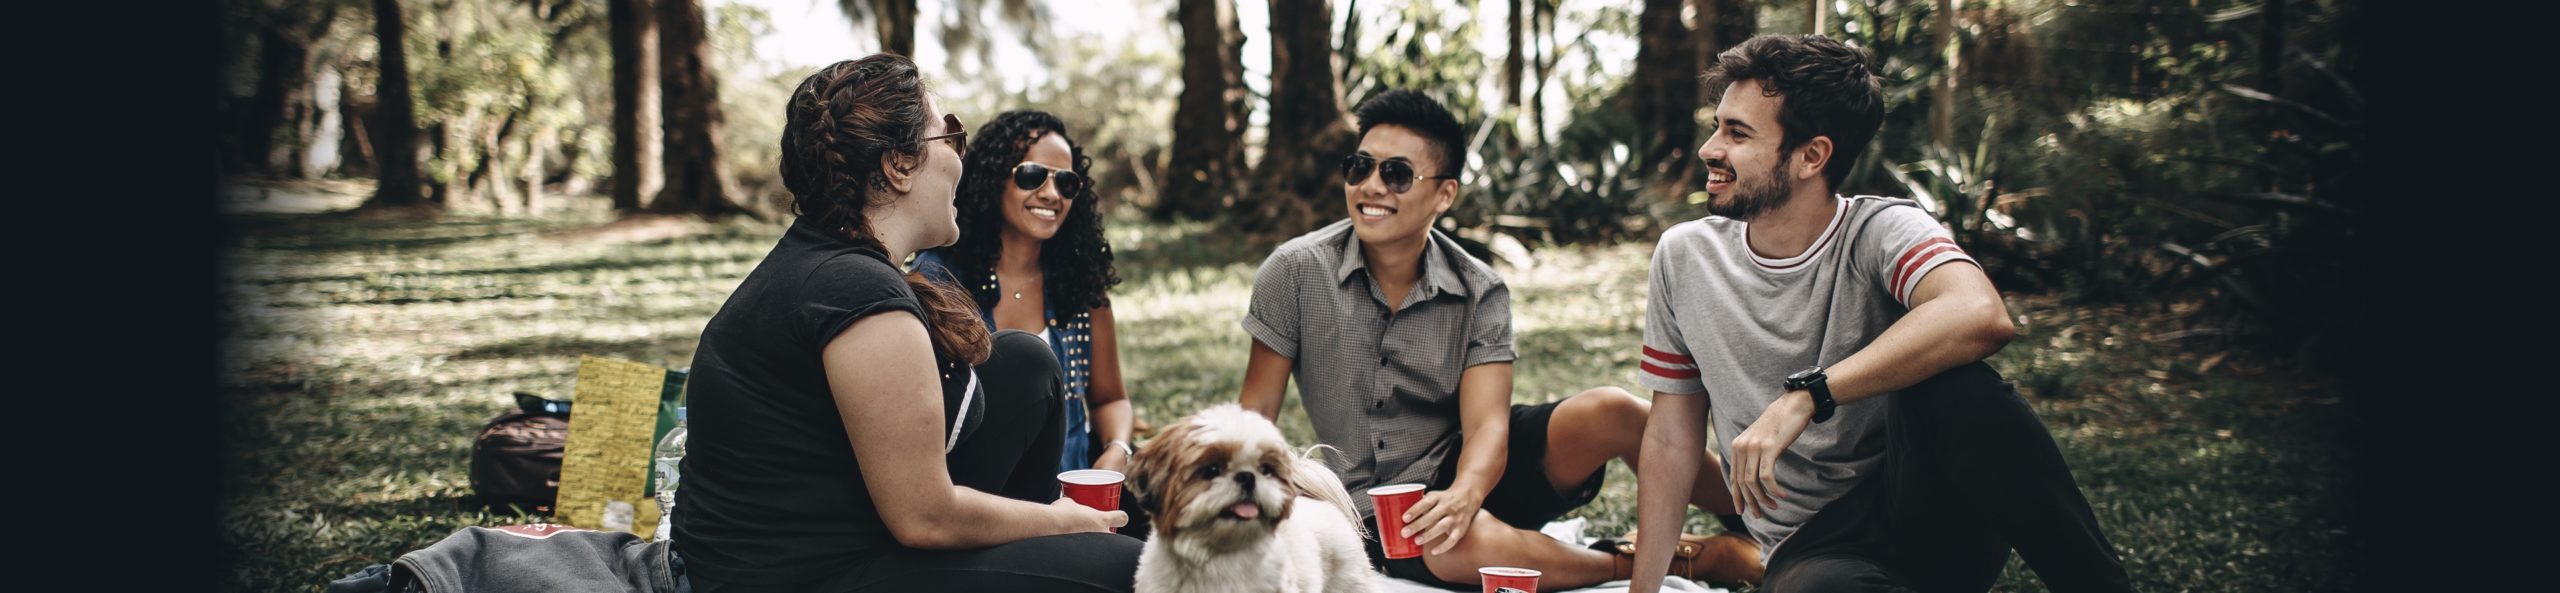 Four people and a dog having a good time at a picnic in a park.